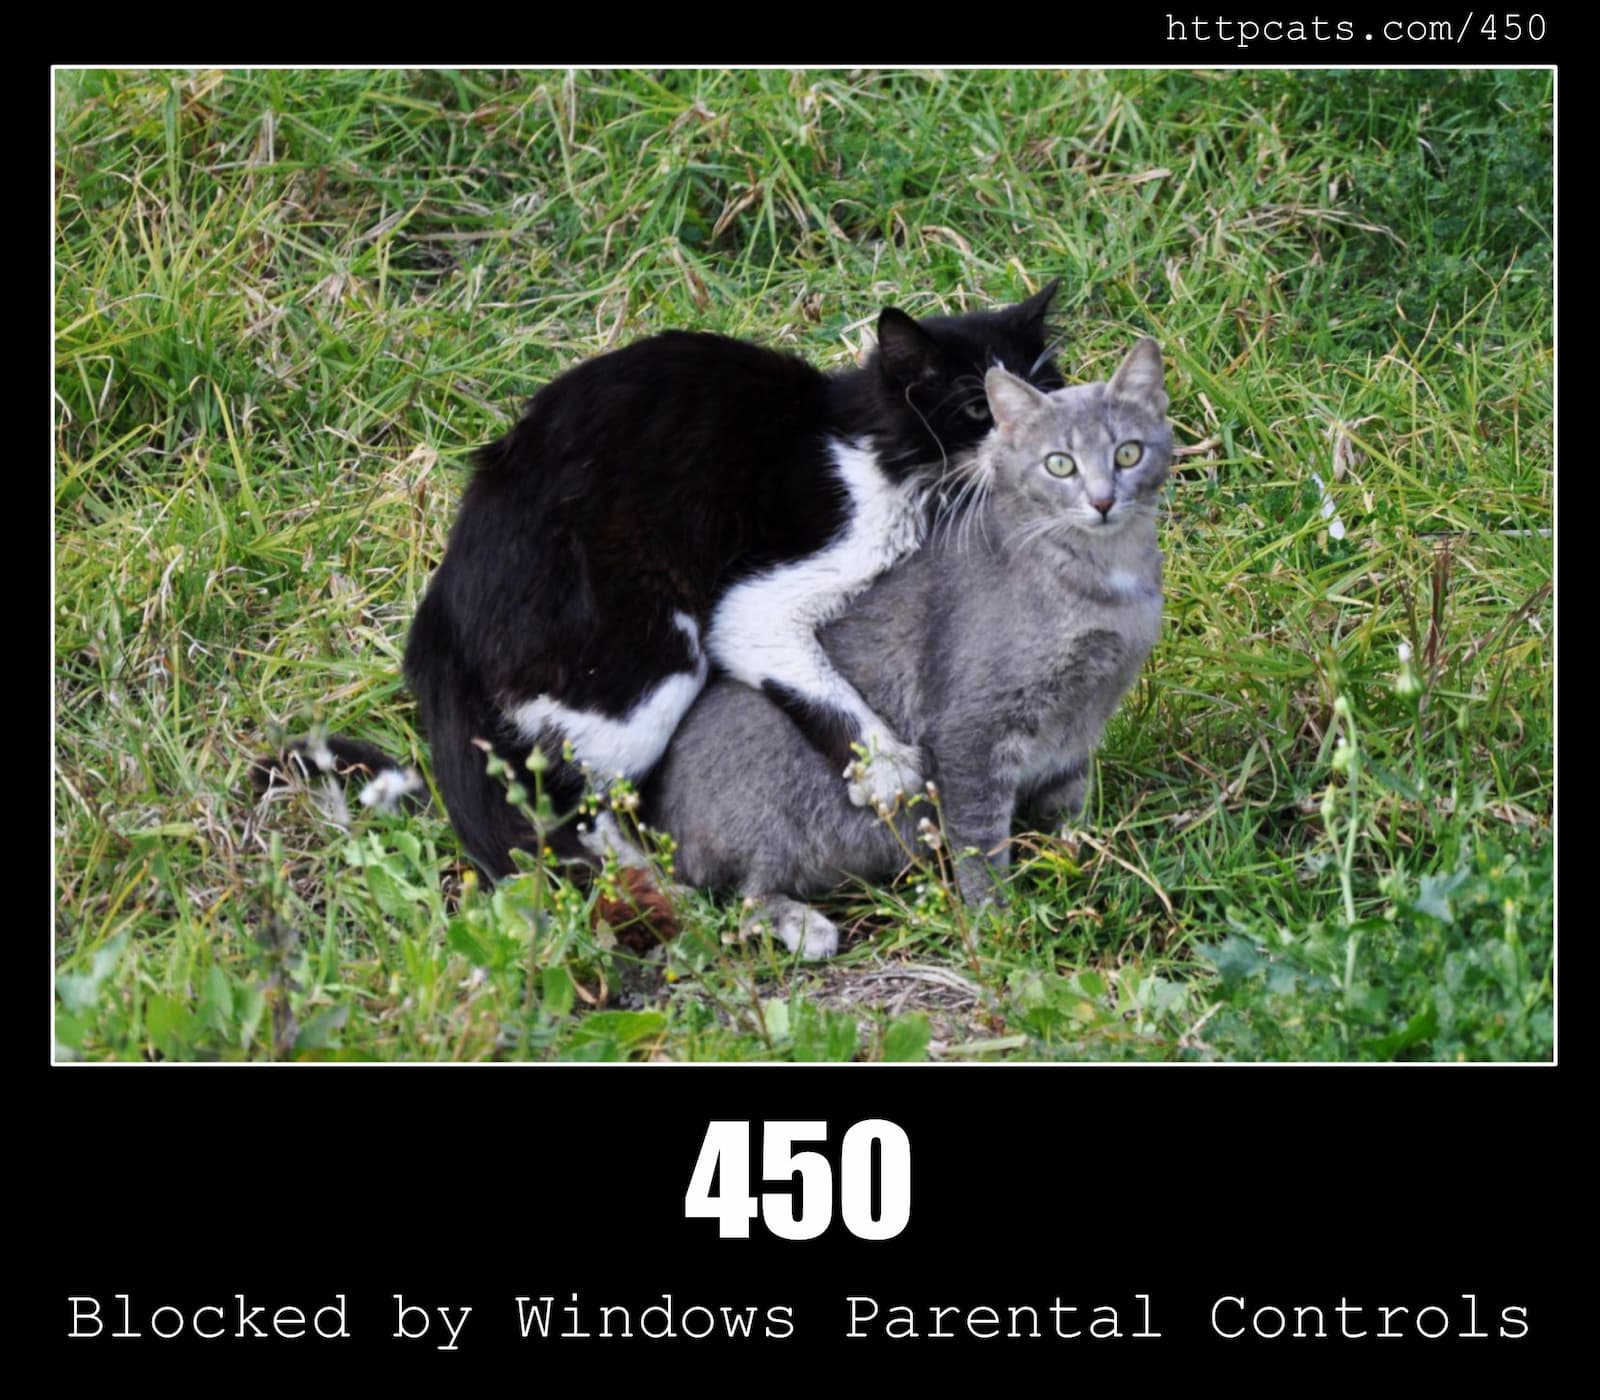 HTTP Status Code 450 Blocked by Windows Parental Controls & Cats